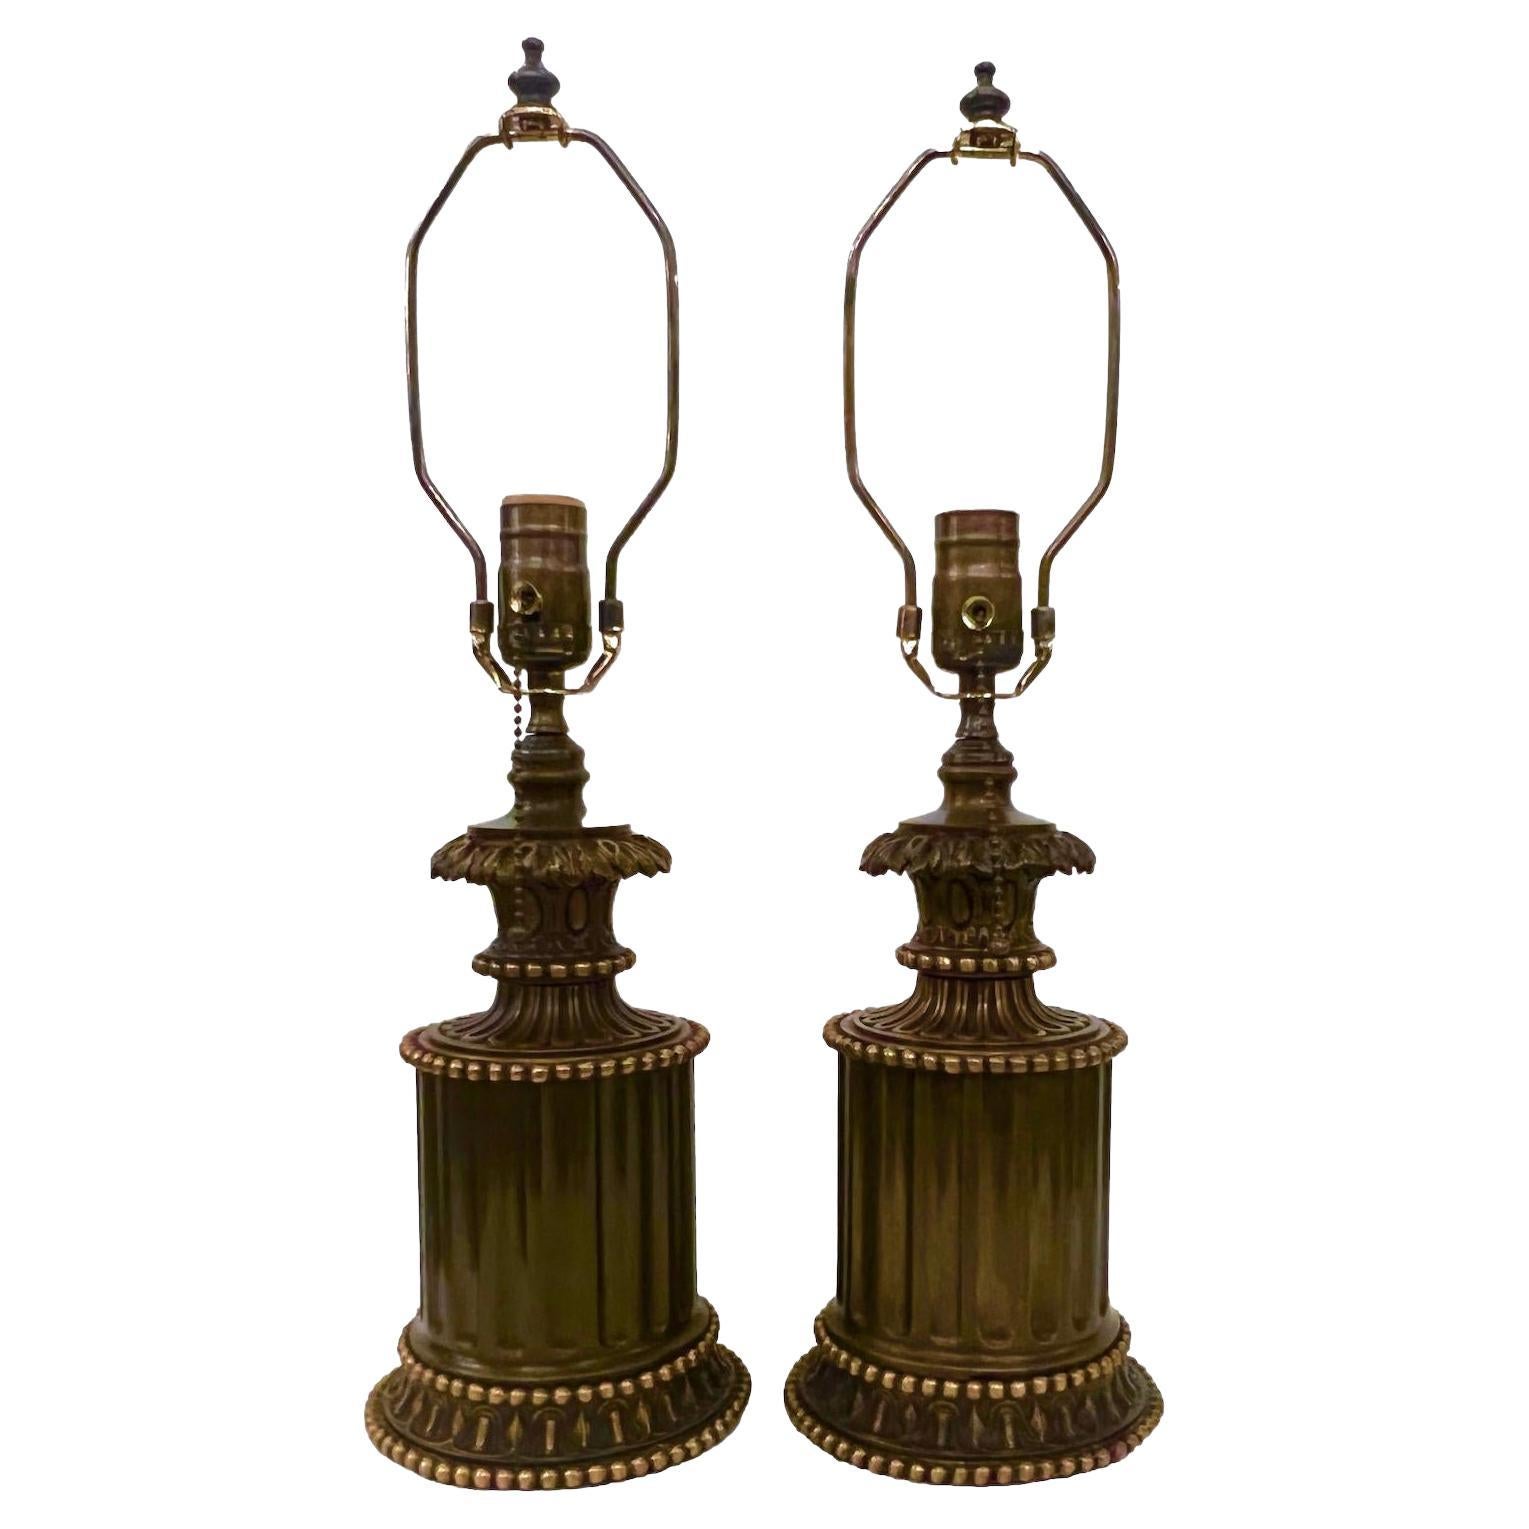 Pair of French Table Lamps